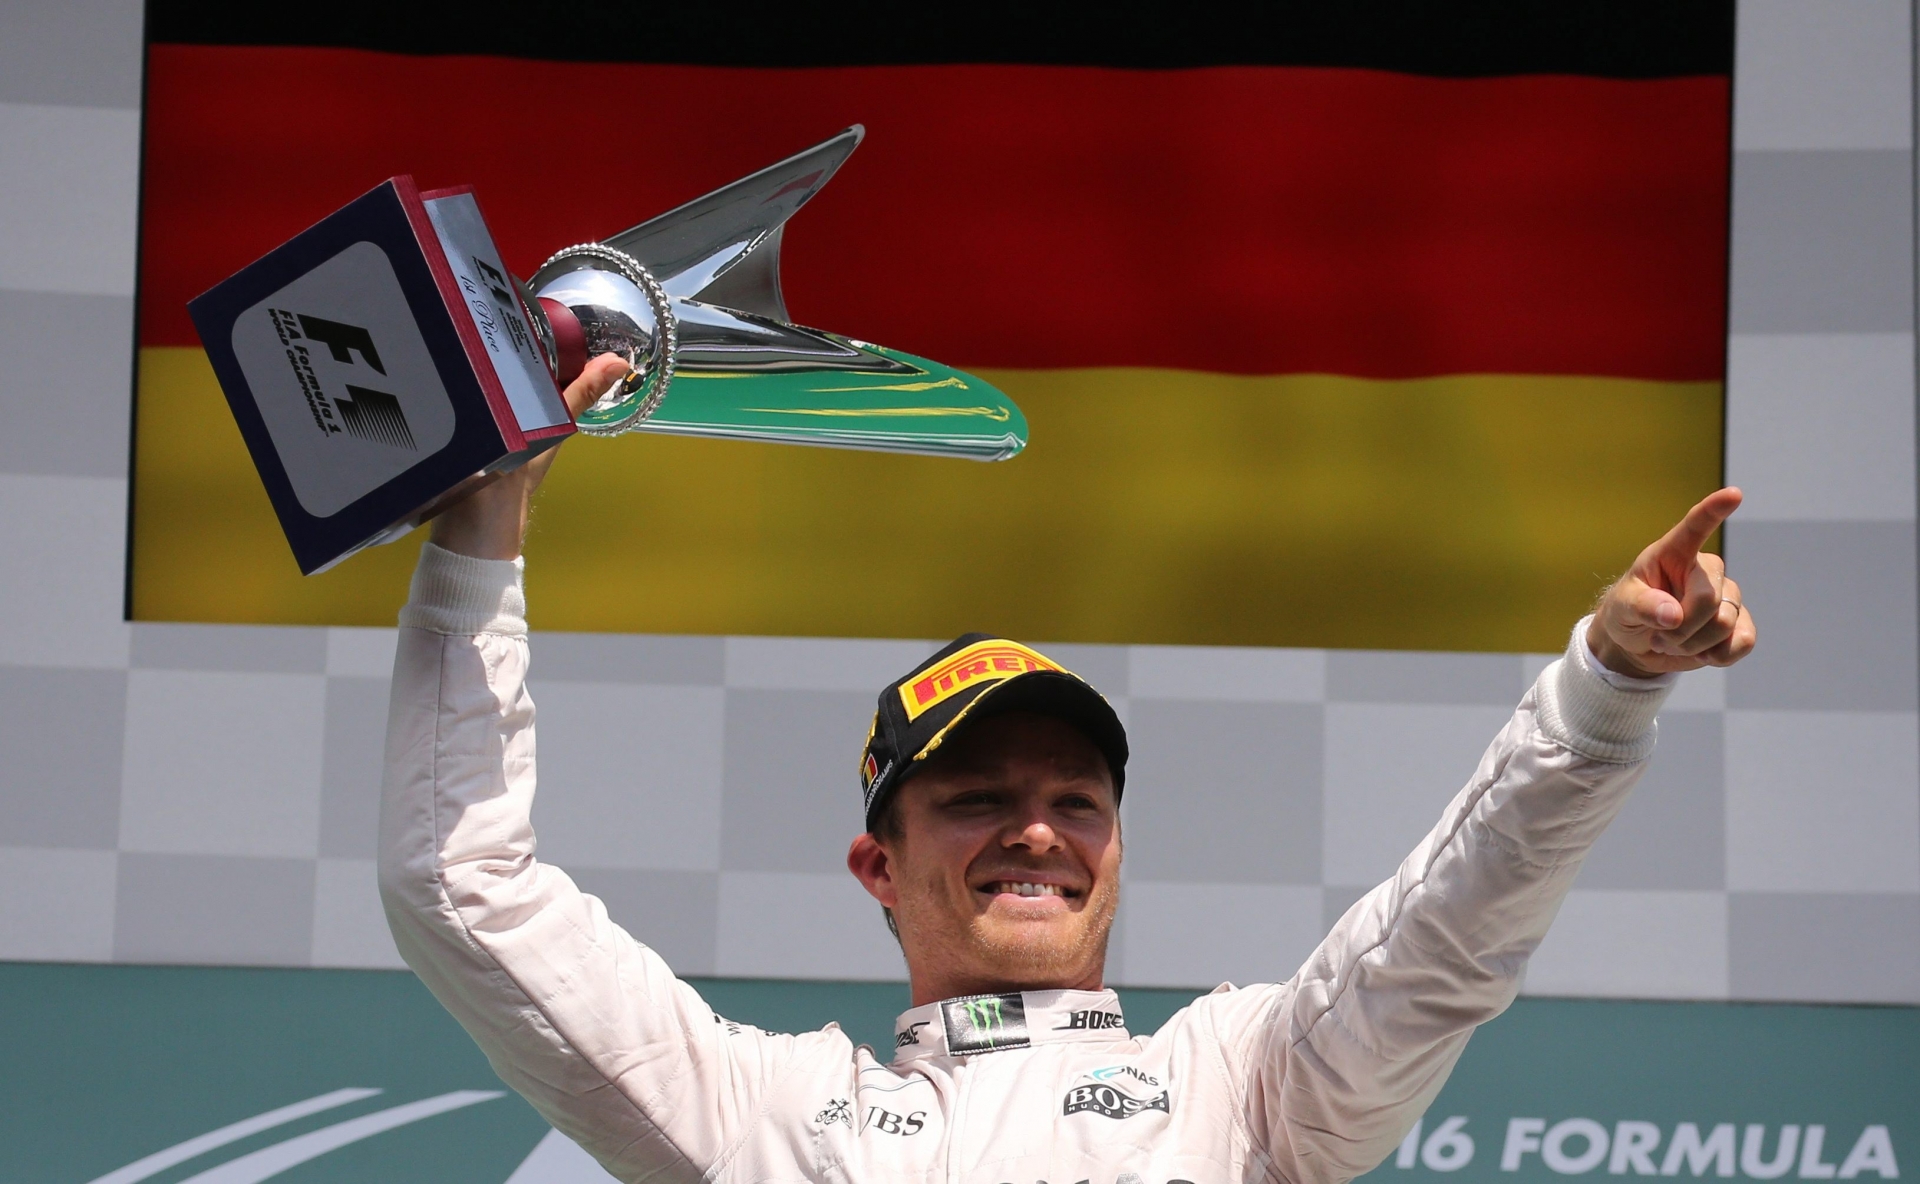 Mercedes driver Nico Rosberg of Germany celebrates by raising his trophy on the podium after winning the Belgian Formula One Grand Prix in Spa-Francorchamps, Belgium, Sunday, Aug. 28, 2016. (AP Photo/Olivier Matthys) Belgium F1 GP Auto Racing